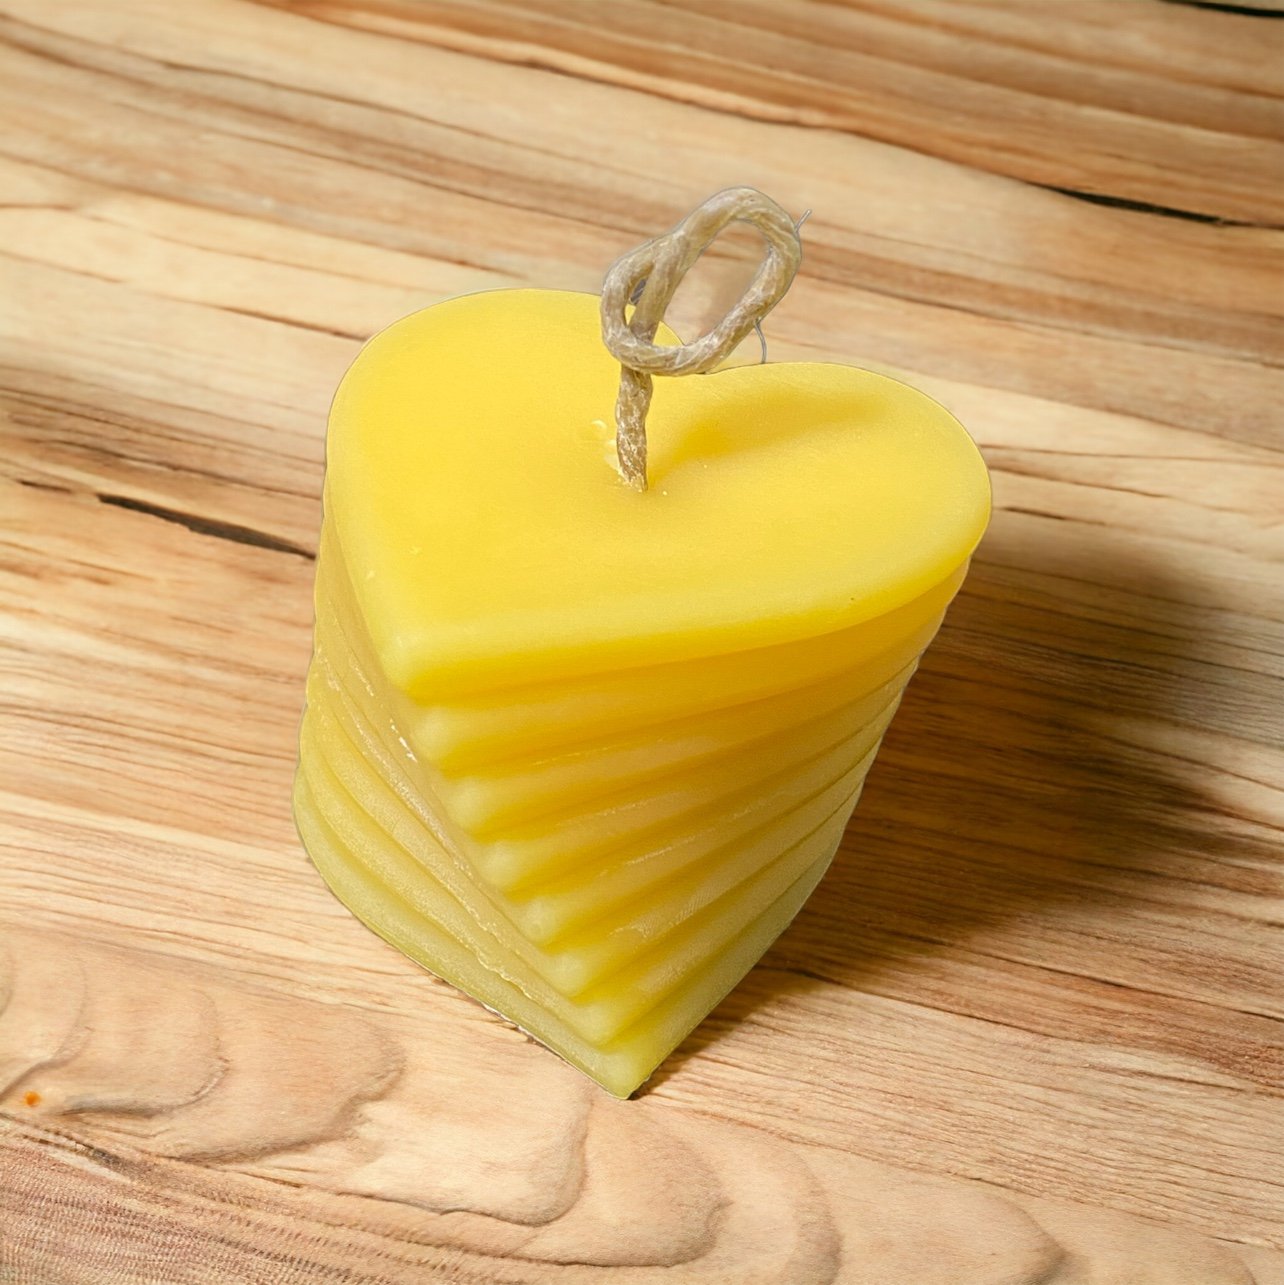 100% pure beeswax candles — White Mountain Apiary